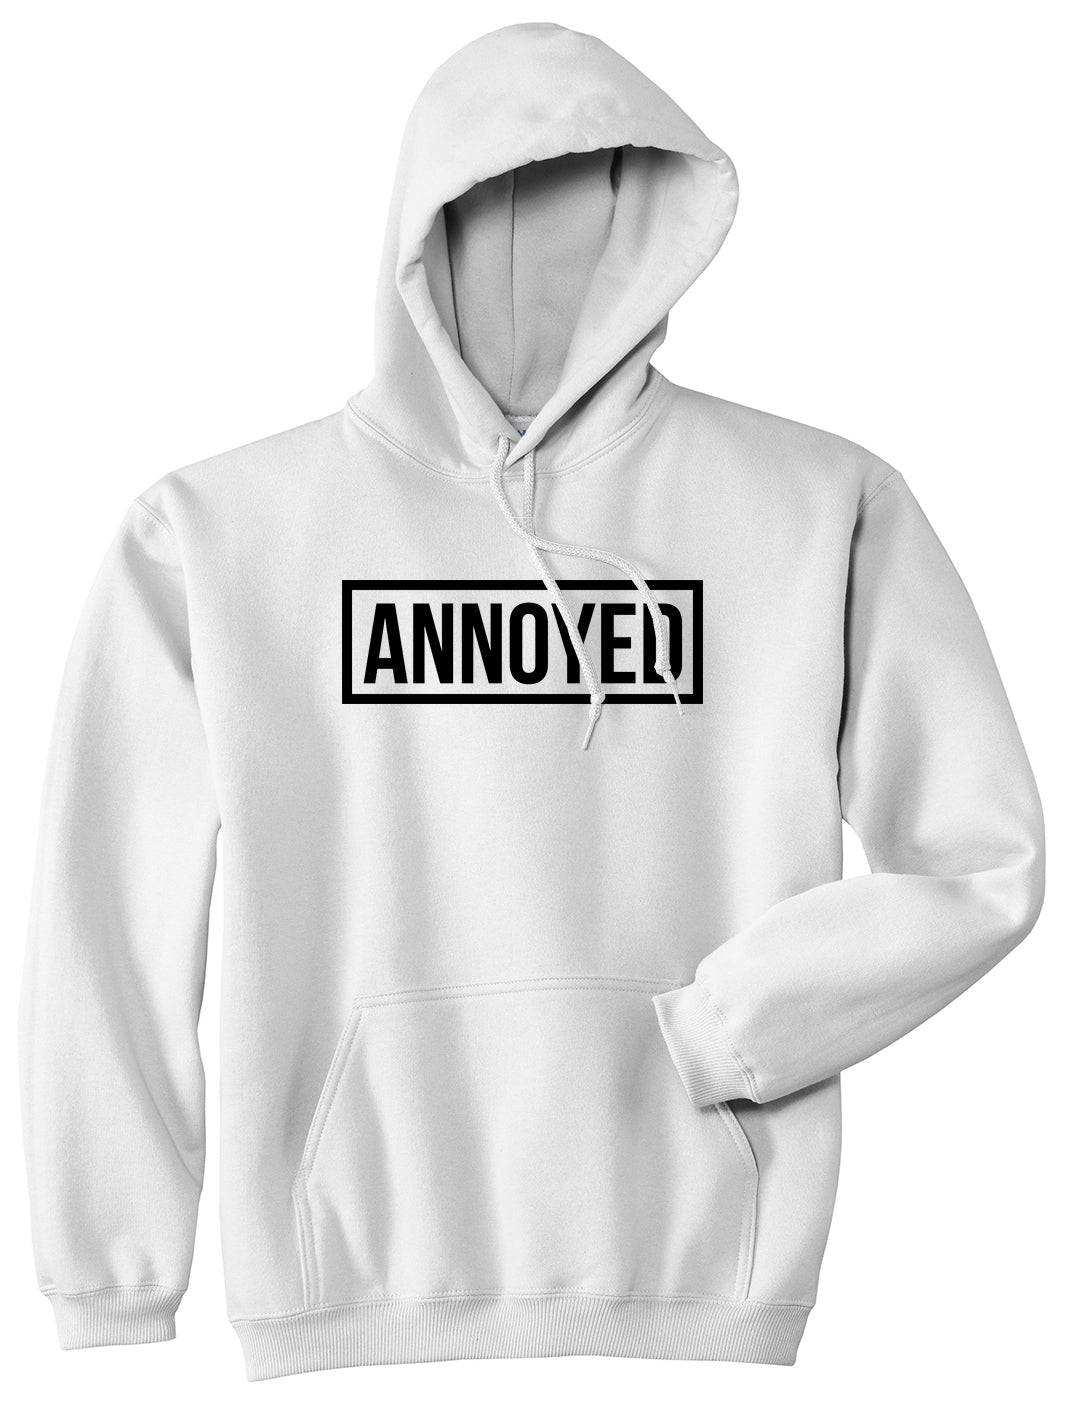 Annoyed White Pullover Hoodie by Kings Of NY